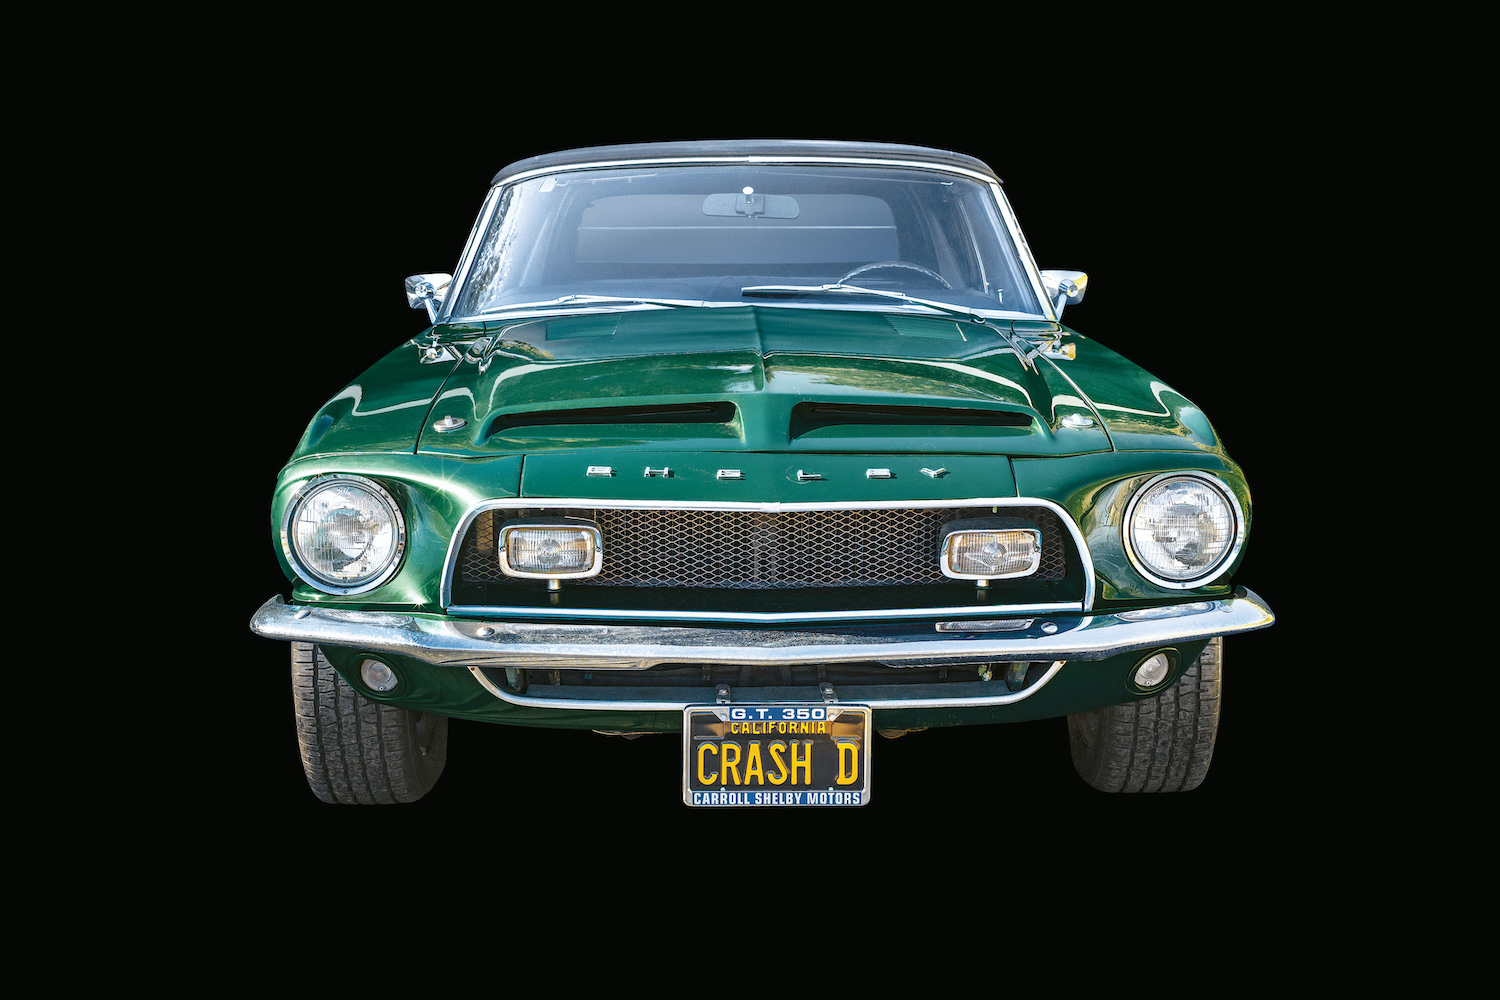 <strong>Kevin Costner, 1968 Shelby Mustang GT350 Convertible</strong><br>“Costner is my buddy’s neighbor. I always see him driving around in some little BMW or this crazy, pimped-out Nissan or Toyota all-terrain truck that he goes fishing in. Costner was like, ‘What are you up to nowadays?’ I said I’m doing this car book. He’s like, ‘You know I’ve got the <em>Bull Durham </em>Shelby Mustang sitting in that garage over there.’ So we go into his garage, there’s a washing machine and dryer, and we peel back the cover and there’s this ‘68 Shelby Mustang. It was the prop car that he somehow convinced the producers to sell him. He was telling me that he always keeps some souvenir out of every movie. And this is what I love about car guys — he just hands me the keys to the car: ‘Just park it and cover it when you’re done.’”